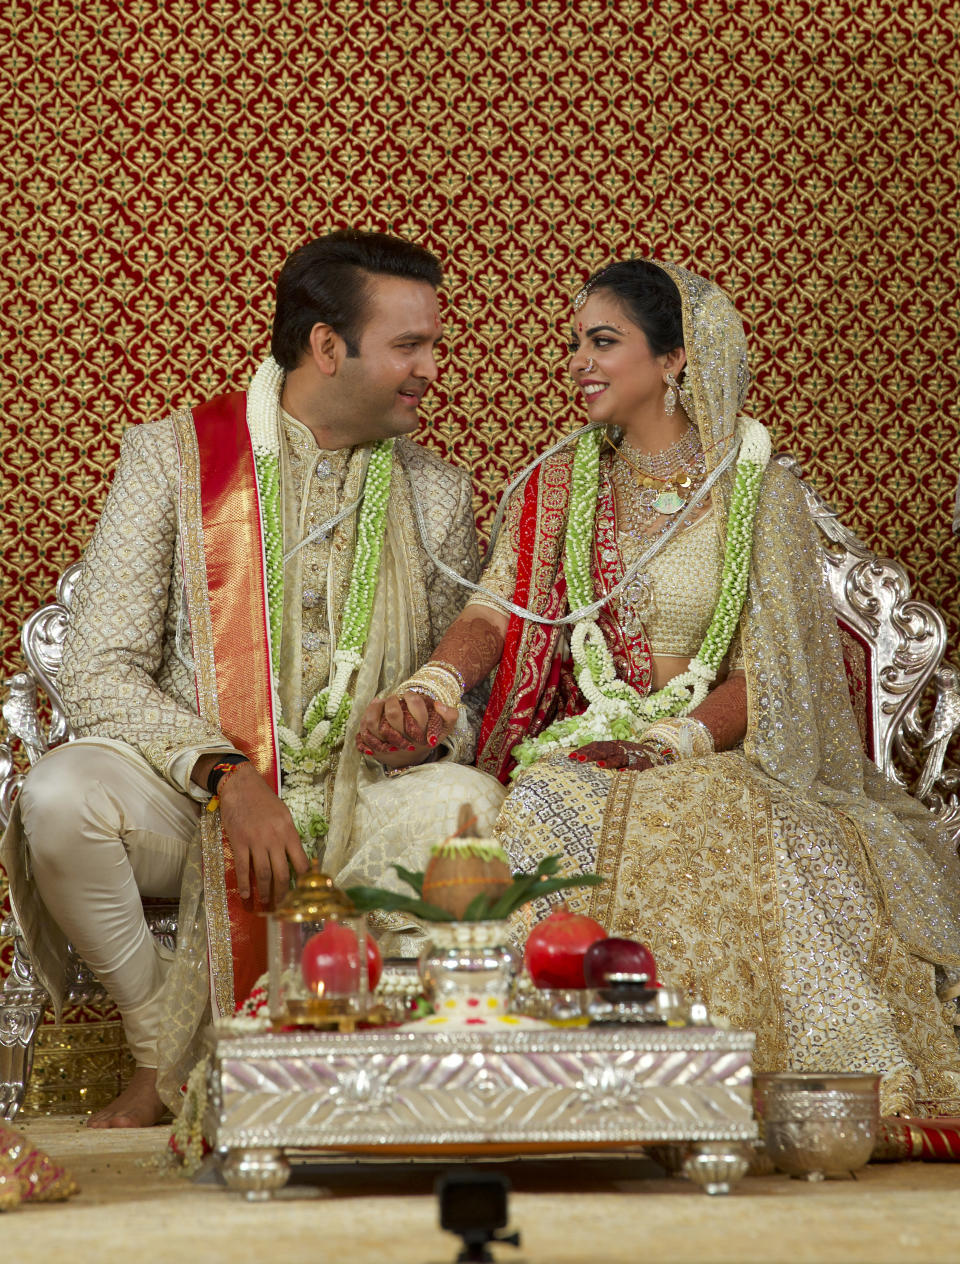 In this handout photo released by Reliance Industries Limited, newlyweds Isha Ambani, right, and Anand Piramal sit holding hands in Mumbai, India. In a season of big Indian weddings, the Wednesday marriage of the scions of two billionaire families might be the biggest of them all. Isha is the Ivy League-educated daughter of industrialist Mukesh Ambani, thought to be India's richest man. The groom is the son of industrialist Ajay Piramal, thought to be worth $10 billion. (Reliance Industries Limited via AP)